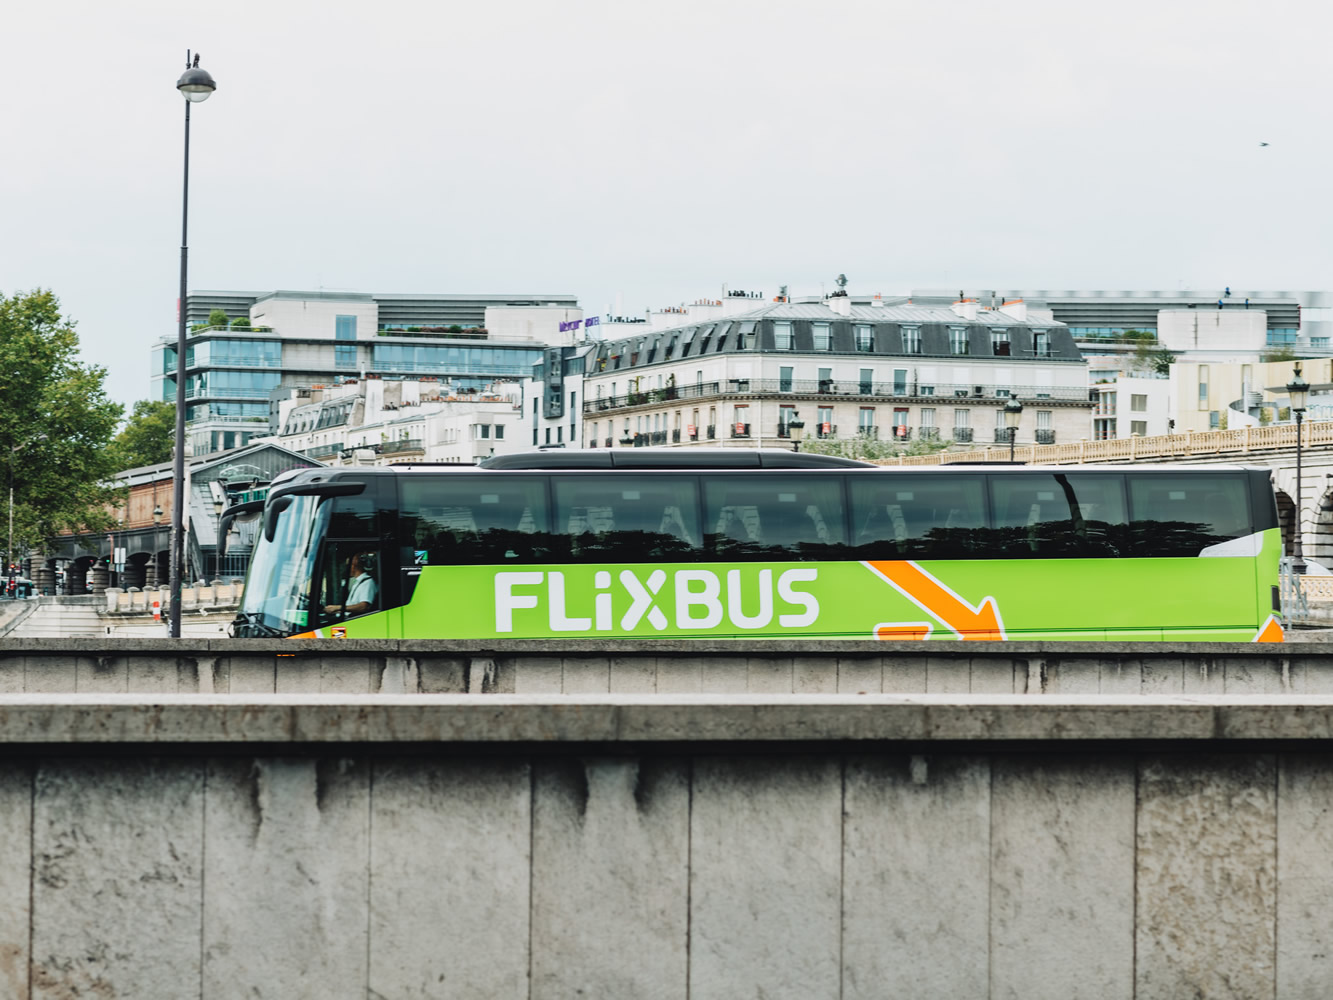 Buy your tickets for the FlixBus to Paris online in advance